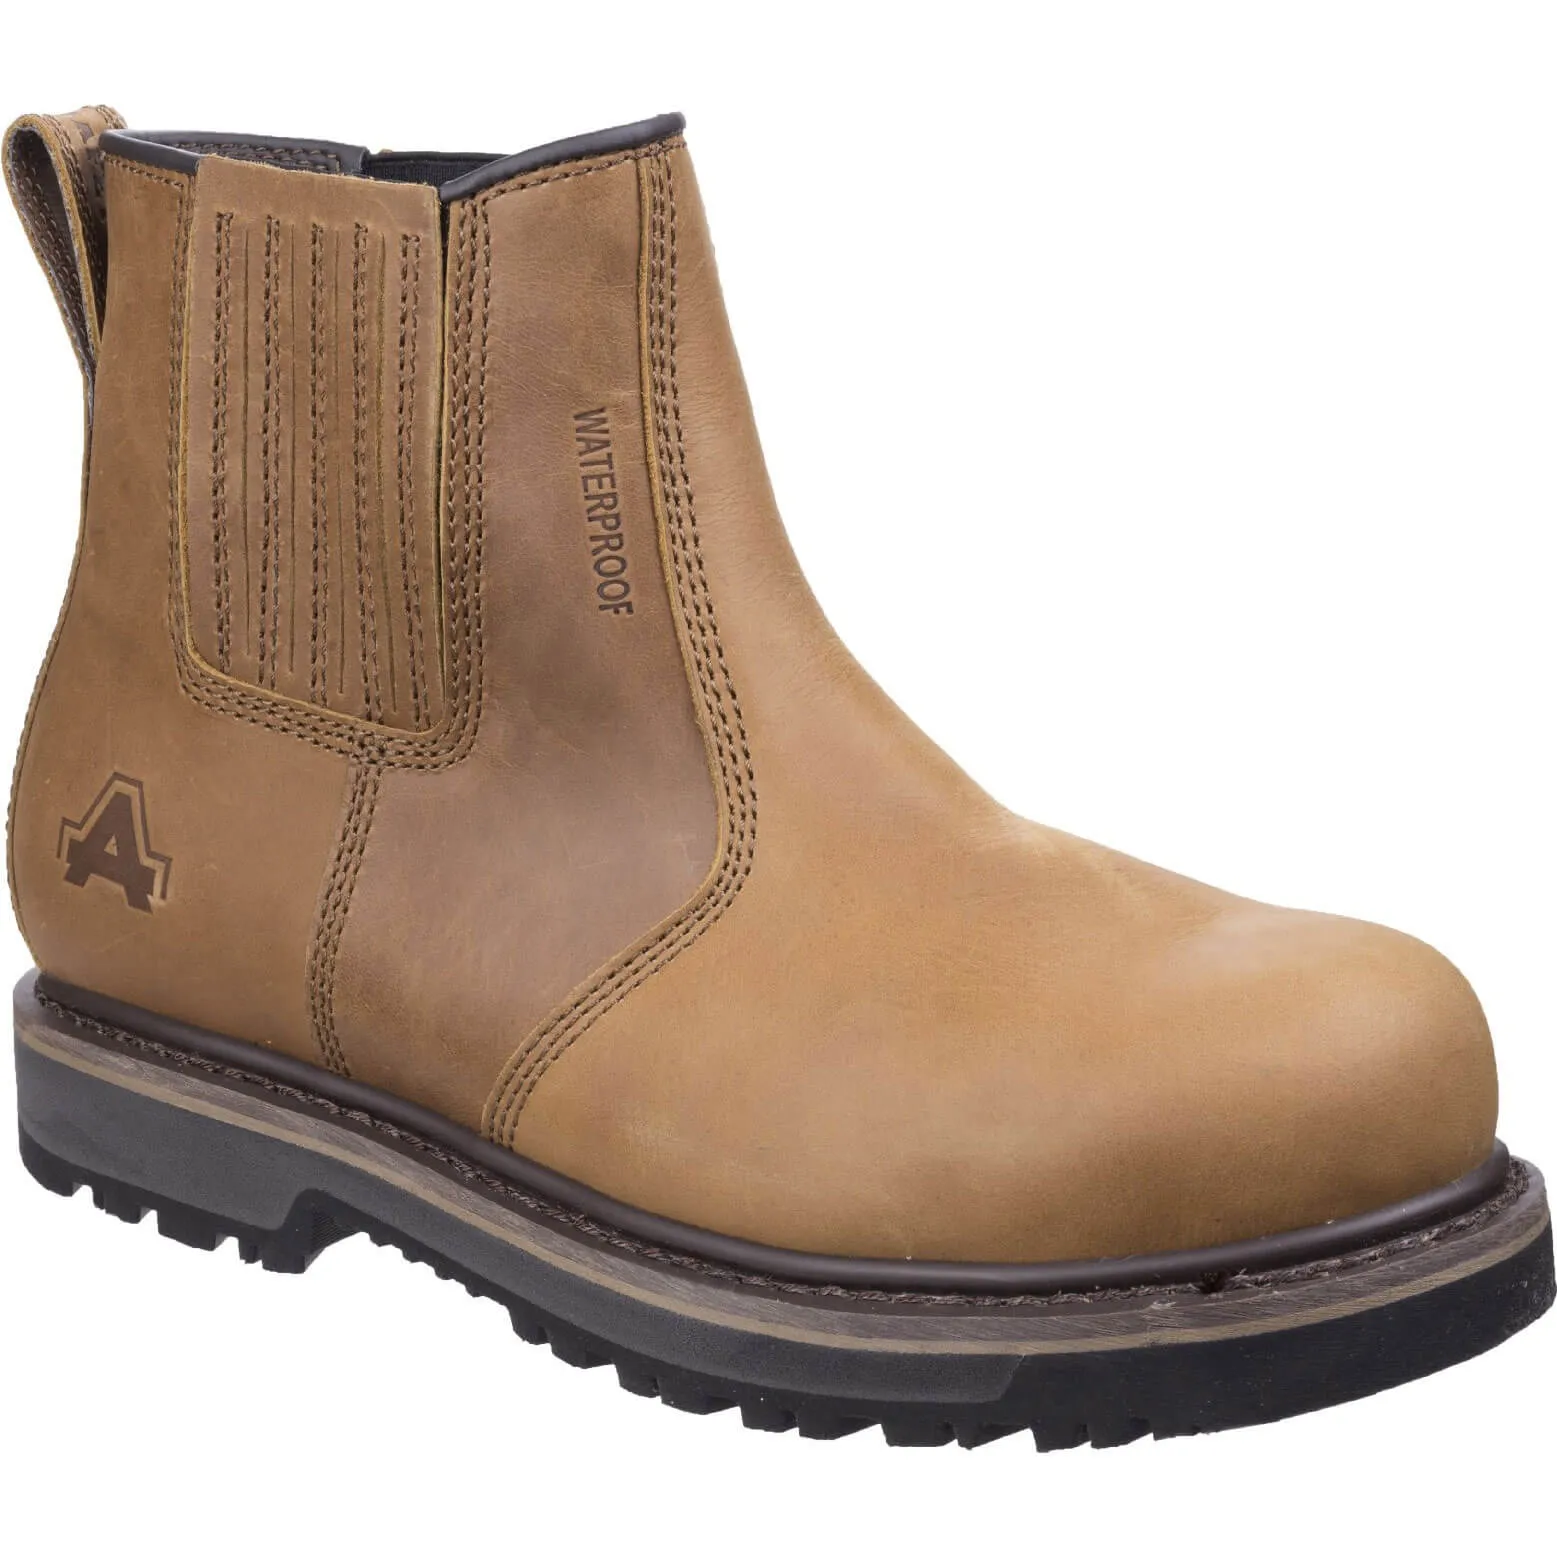 Amblers Mens Safety As232 Safety Boots - Tan, Size 11